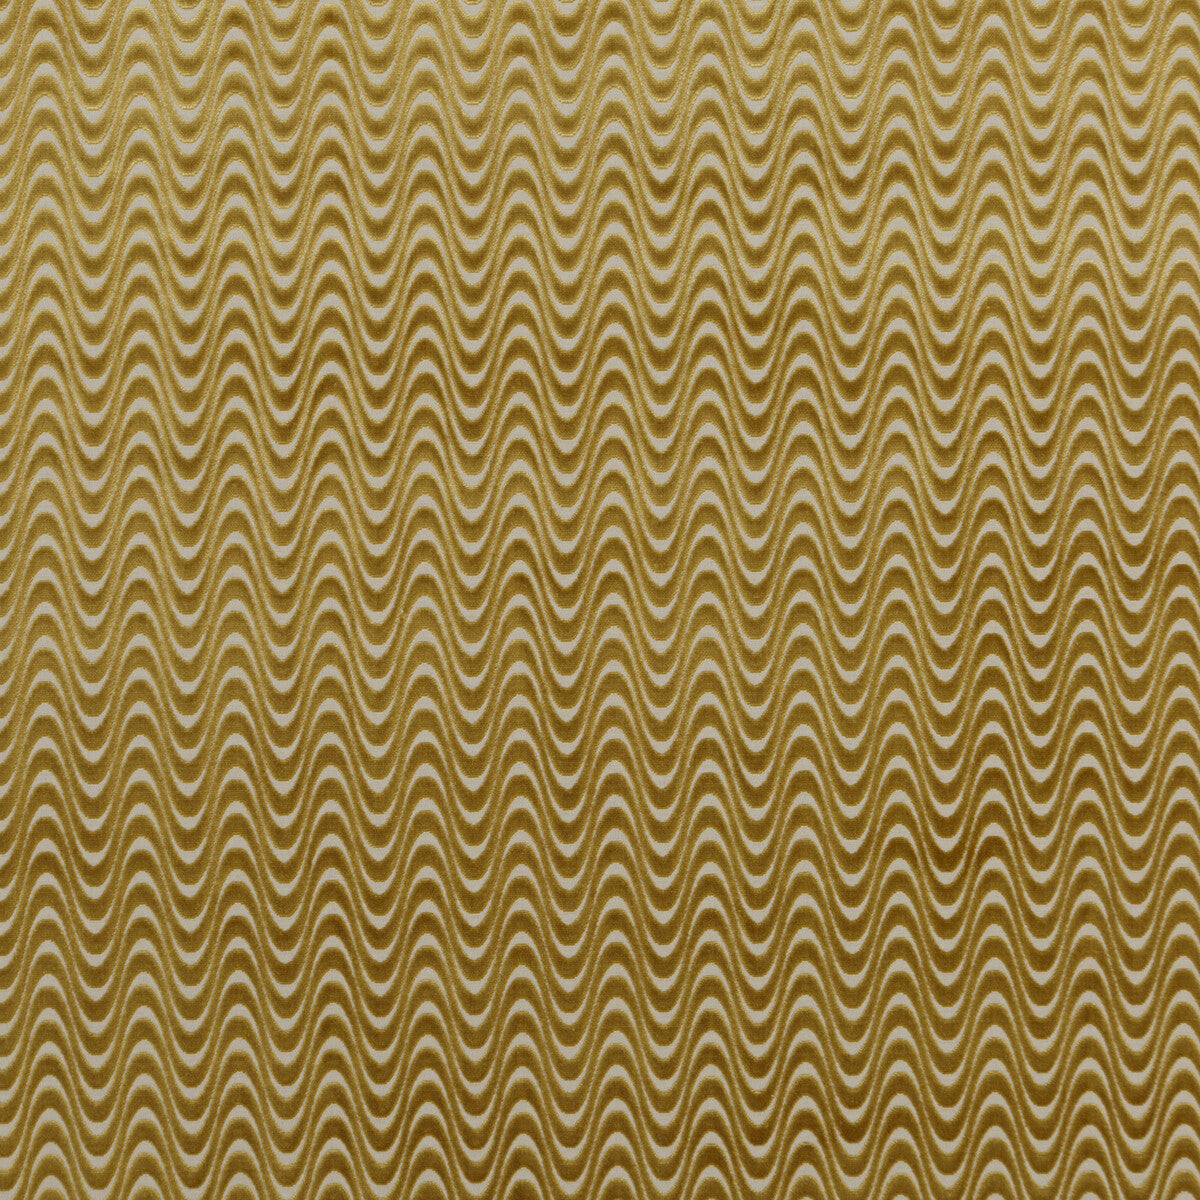 Jive fabric in ochre color - pattern PF50421.840.0 - by Baker Lifestyle in the Carnival collection